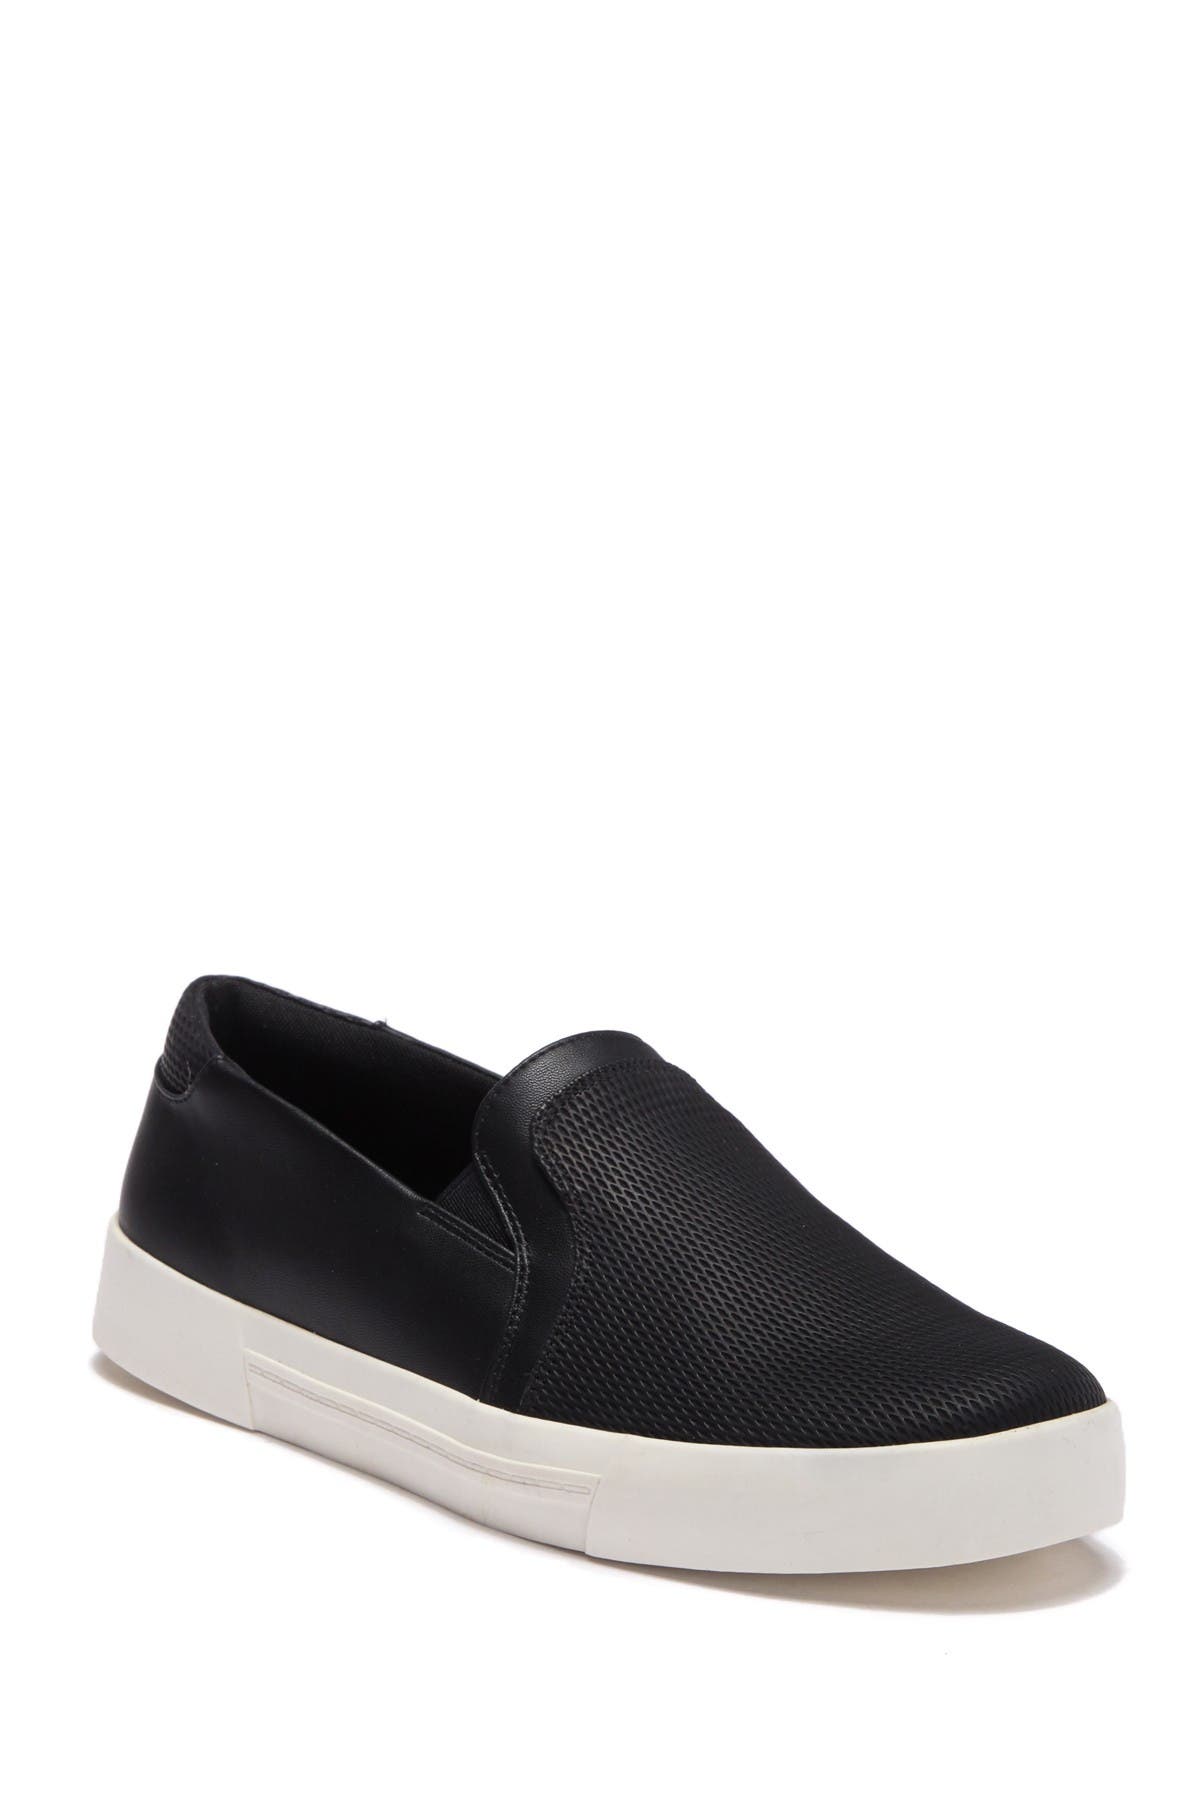 Call It Spring | Northelle Slip-On 